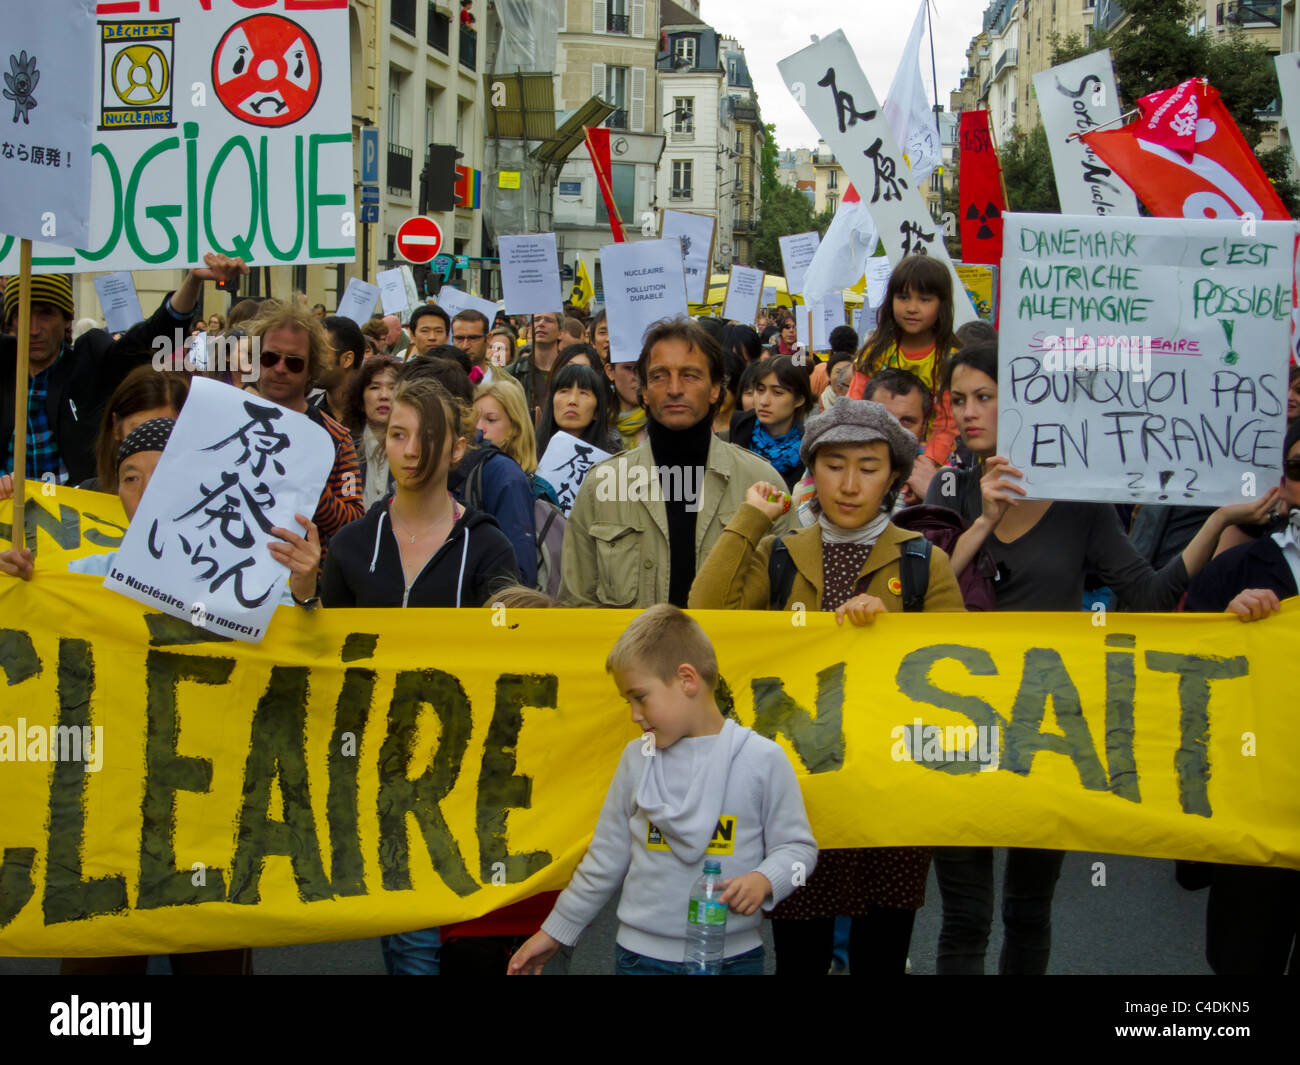 Paris, France, Crowd of People, Environmental Demonstration Against Nuclear Power, Marching with Protest Signs, Banner Stock Photo